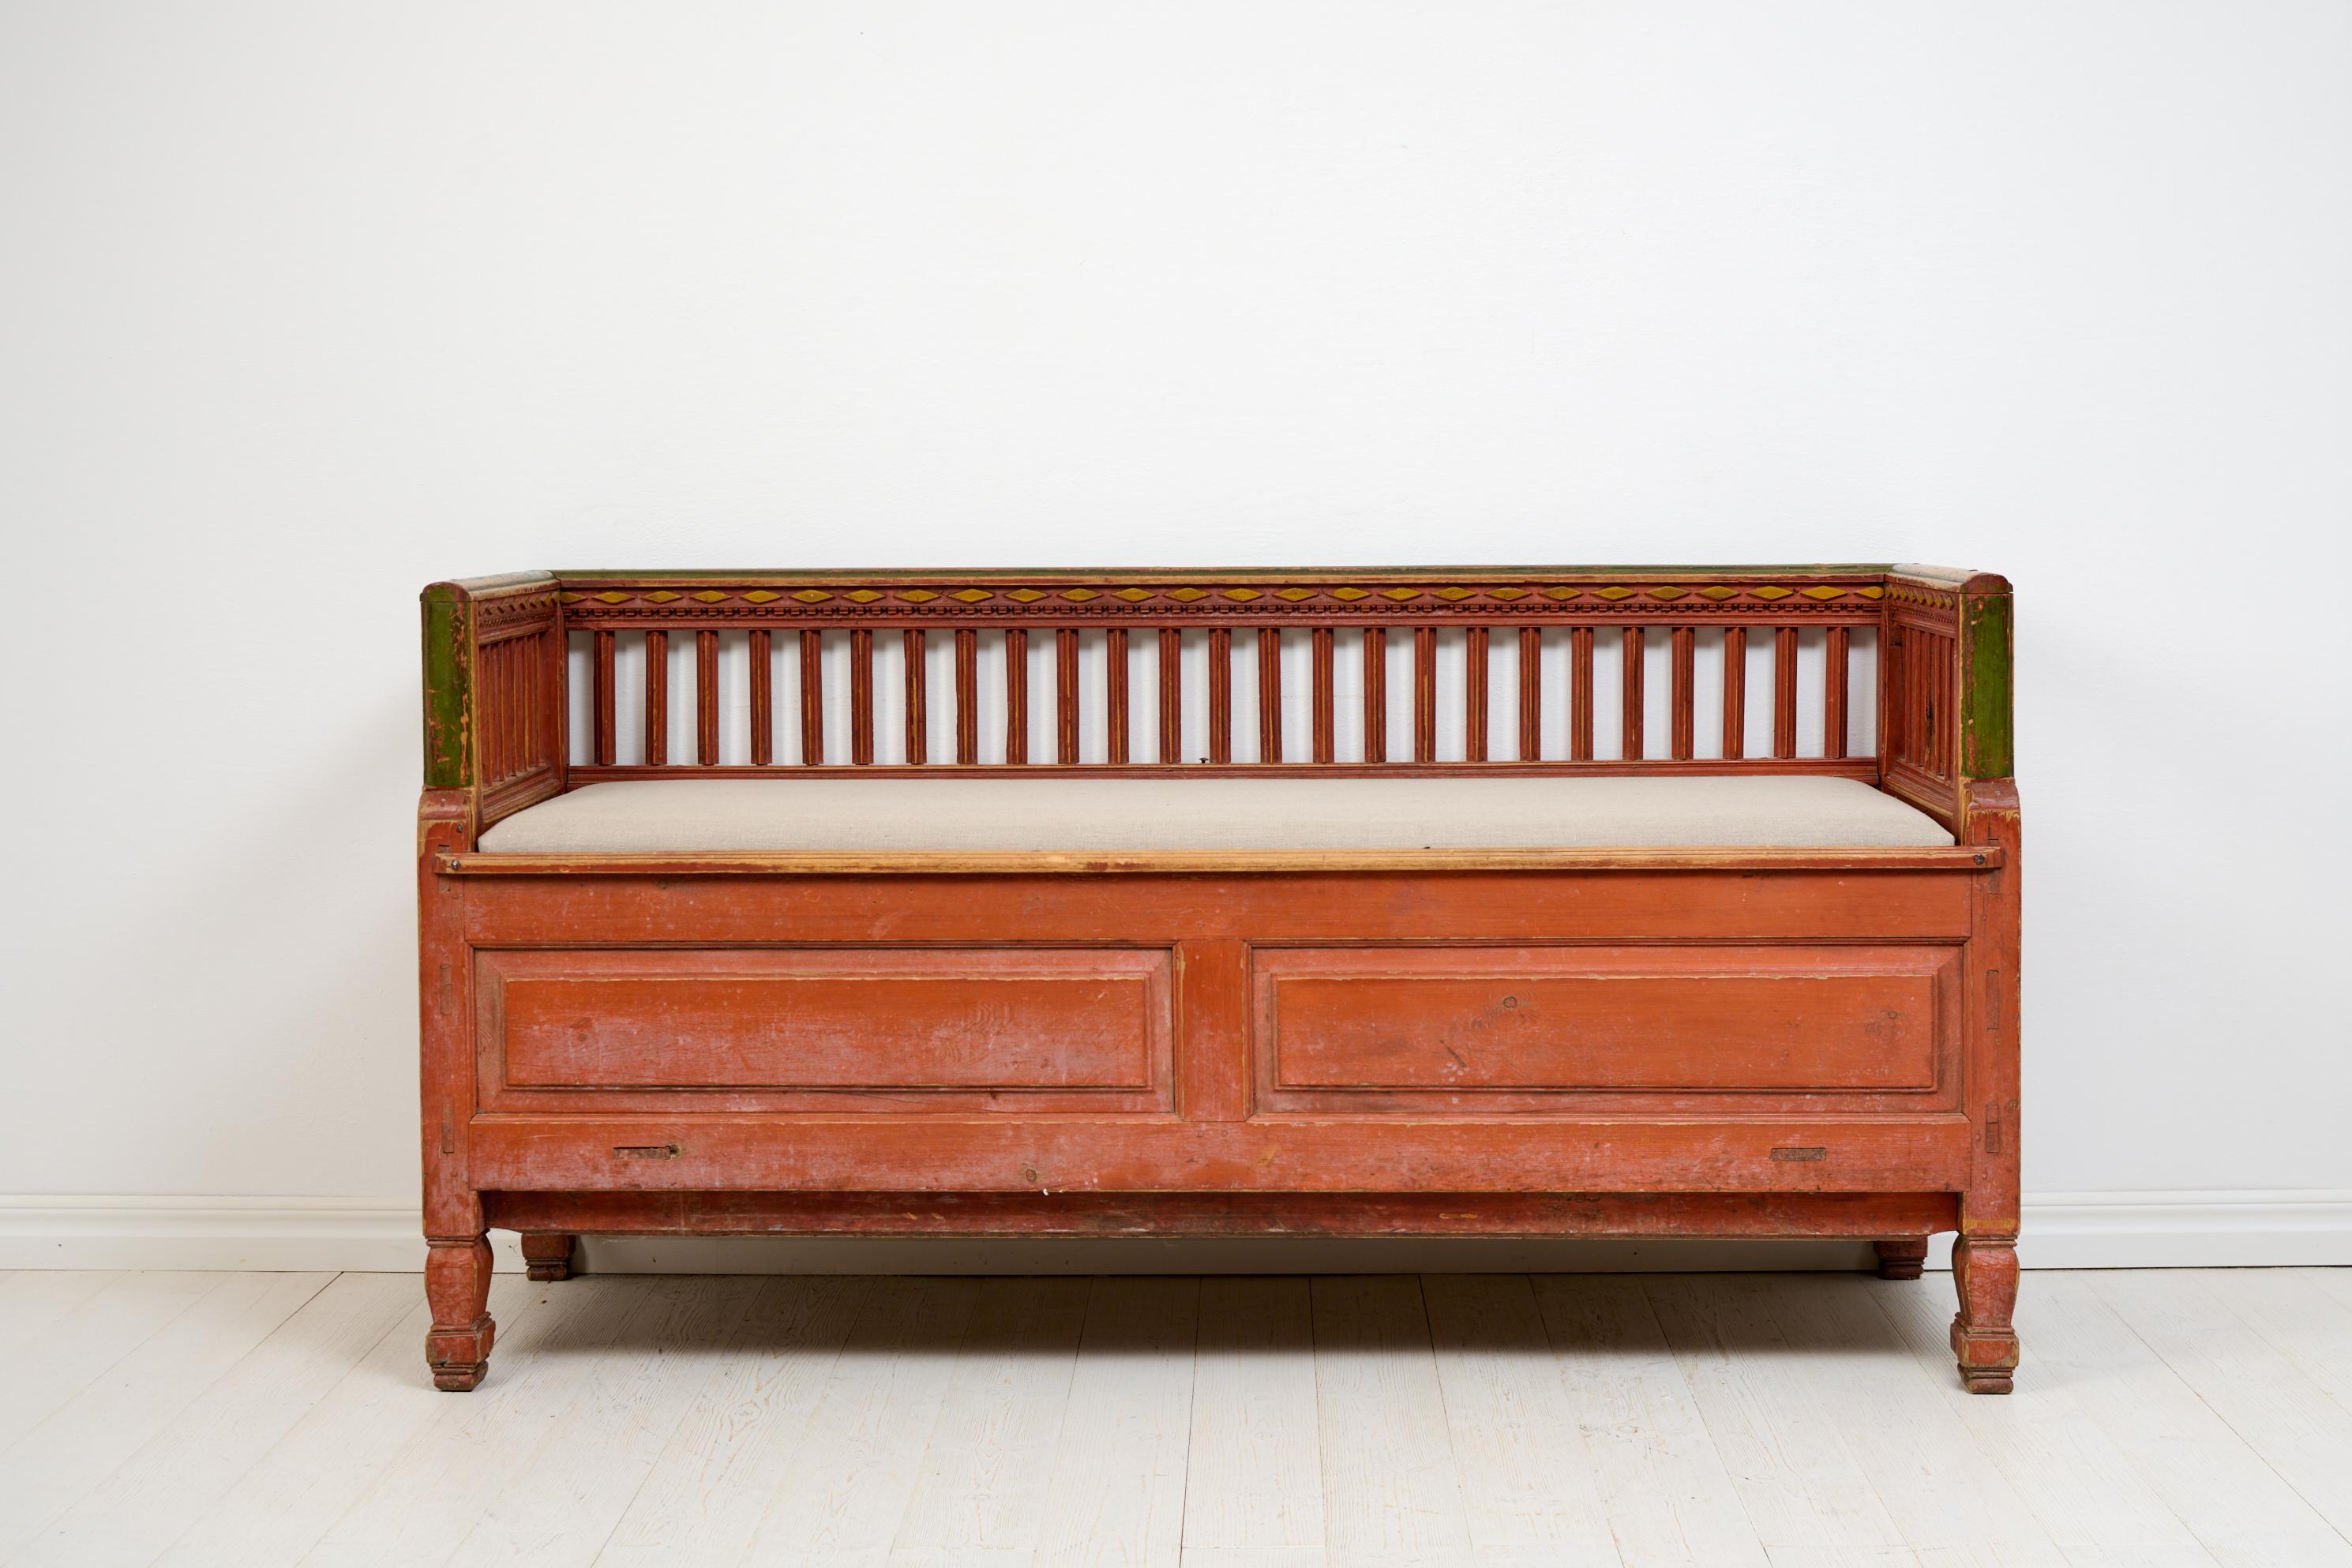 Rare folk art bench or sofa from northern Sweden, unusually well-crafted with decorative panels and sculpted legs. It features carved wooden decorations at the top of the backrest and was handcrafted in solid pine around 1820. The untouched original